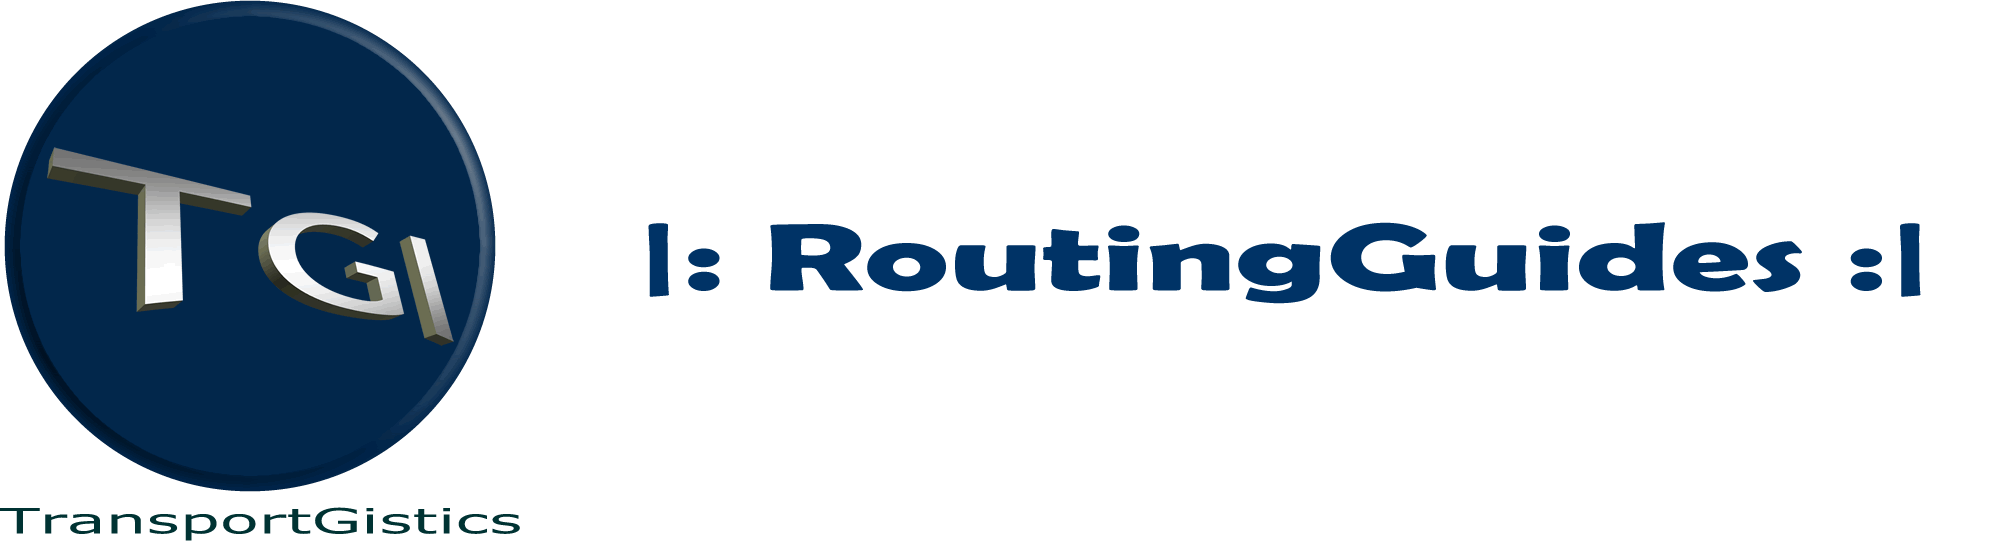 routing guide is the key to vendor inbound compliance - sign up now and get free web based Bills of Lading